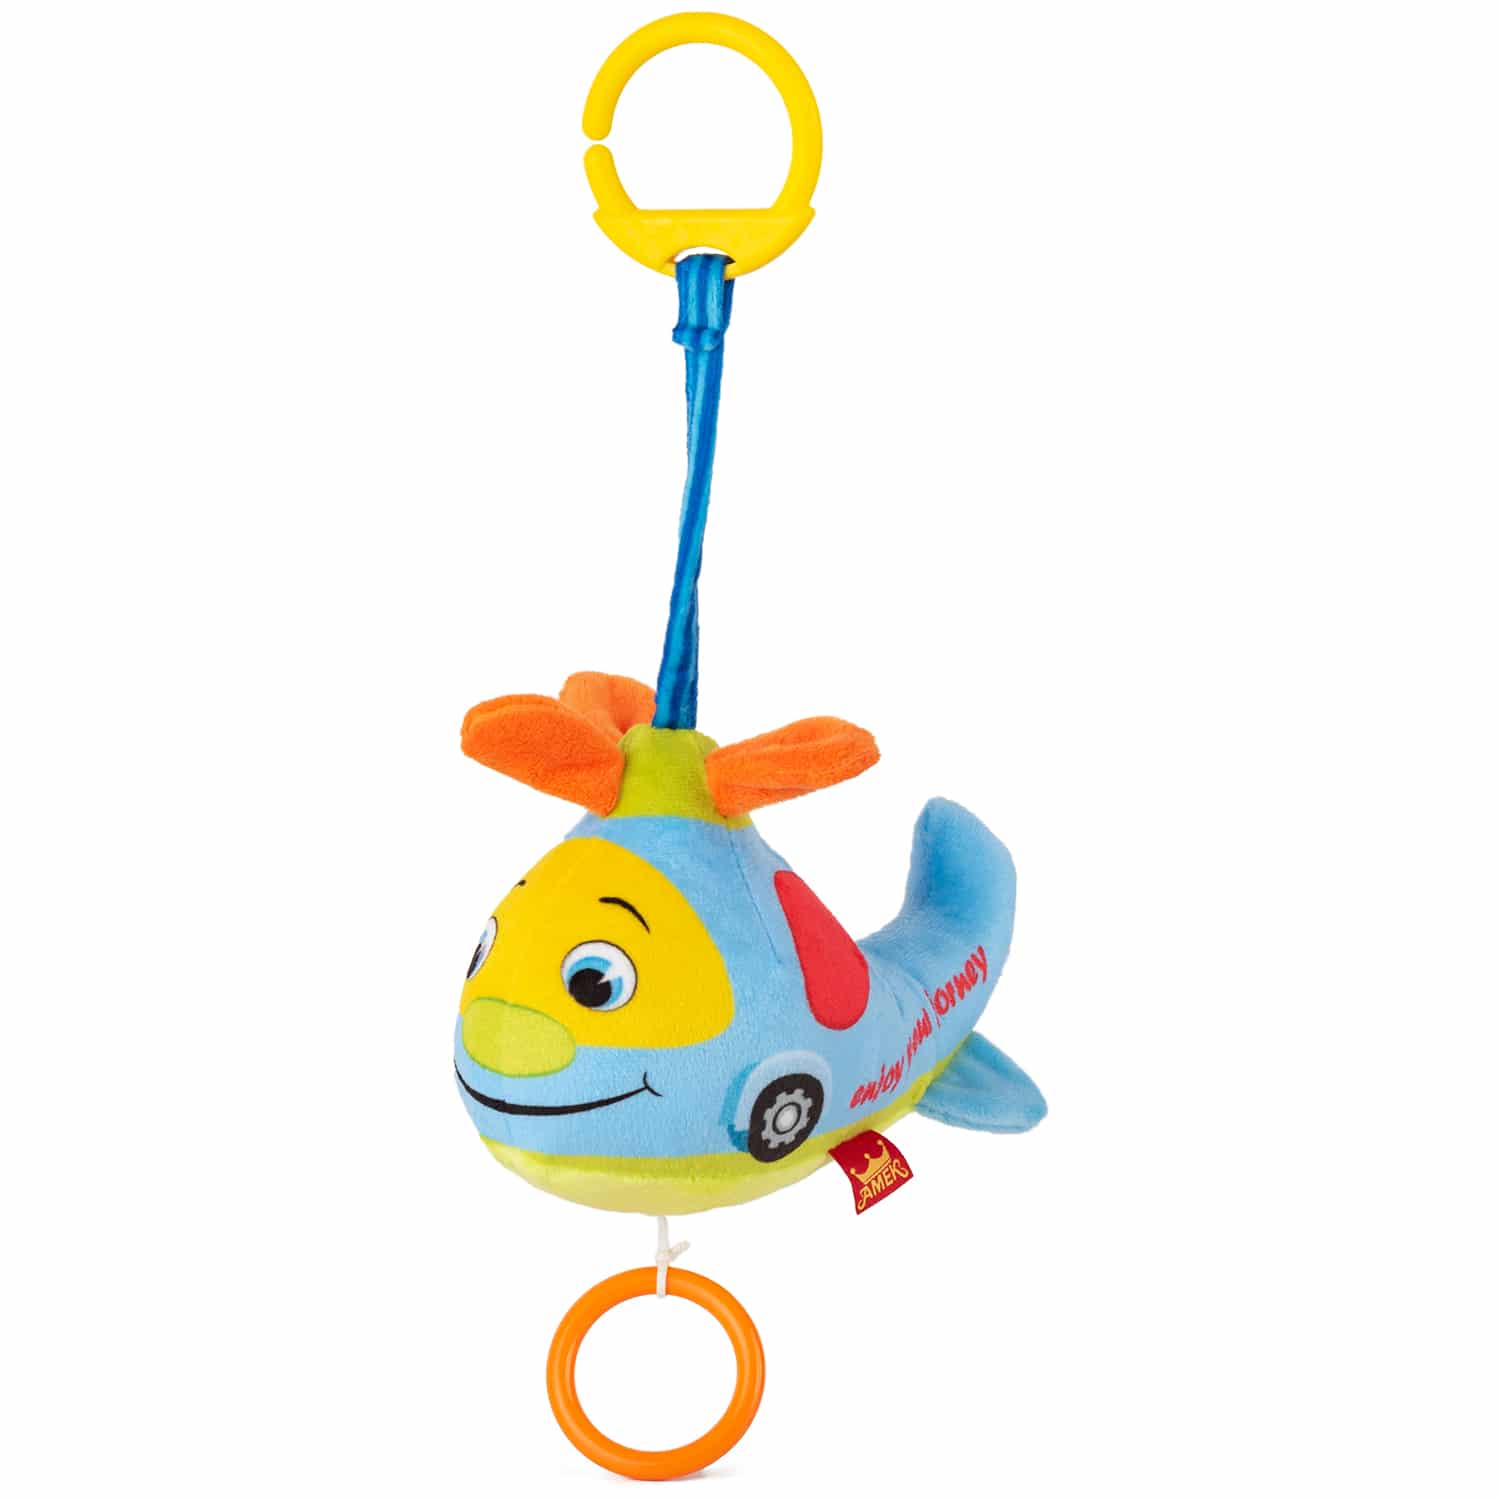 Baby lantern Helicopter